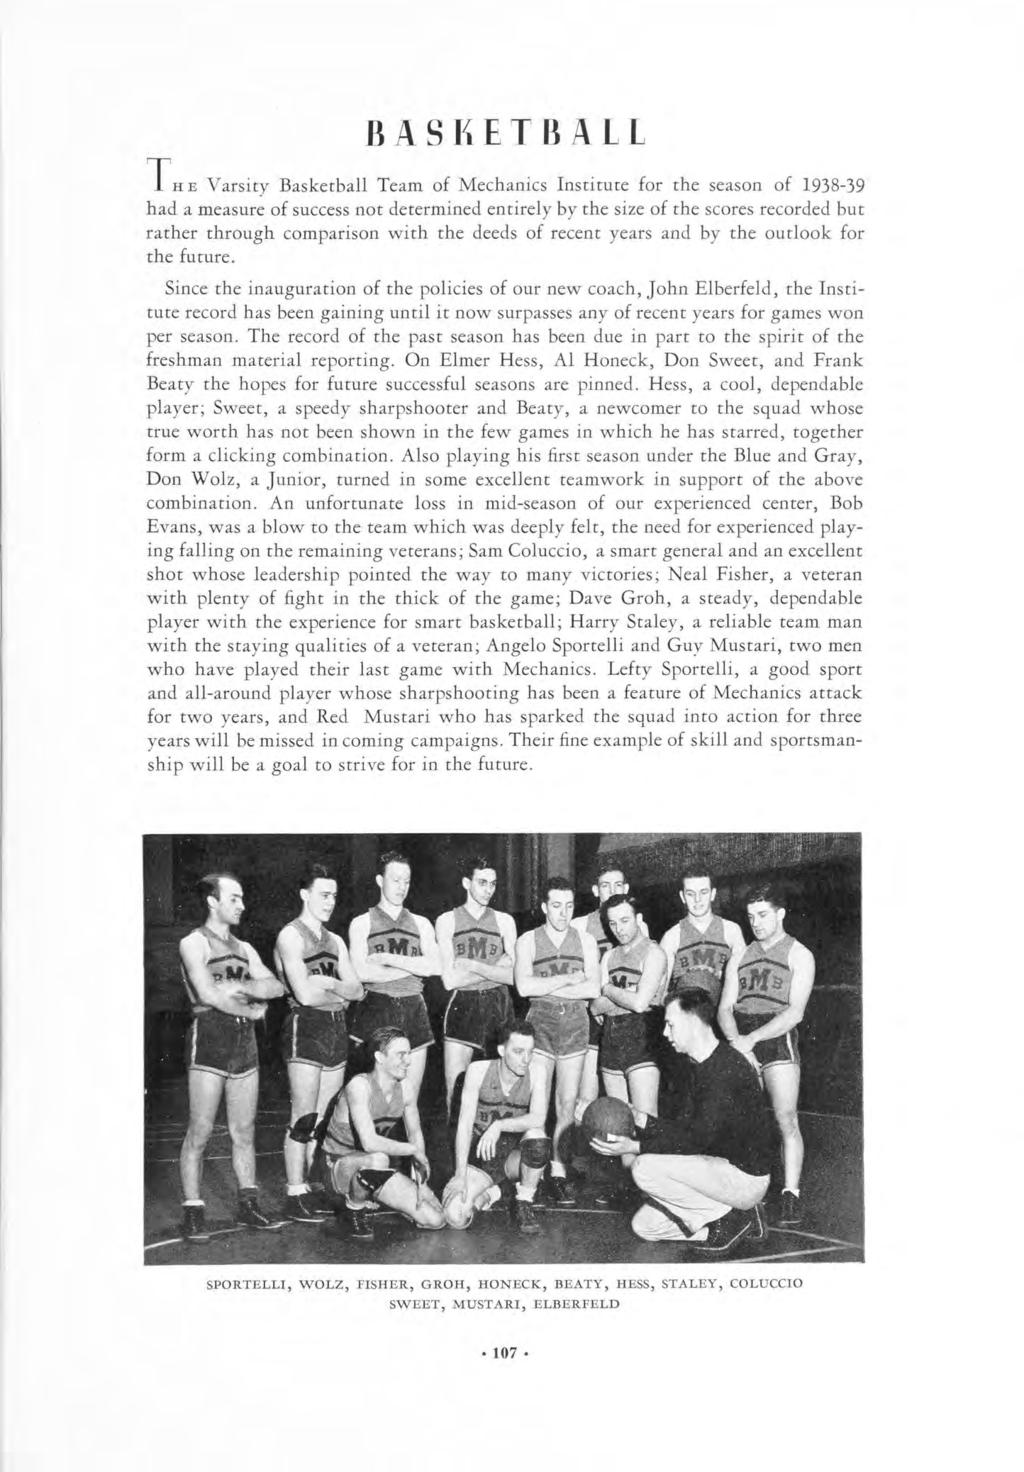 BASKETBALL THE Varsity Basketball Team of Mechanics Institute for the season of 1938-39 had a measure of success not determined entirely by the size of the scores recorded but rather through